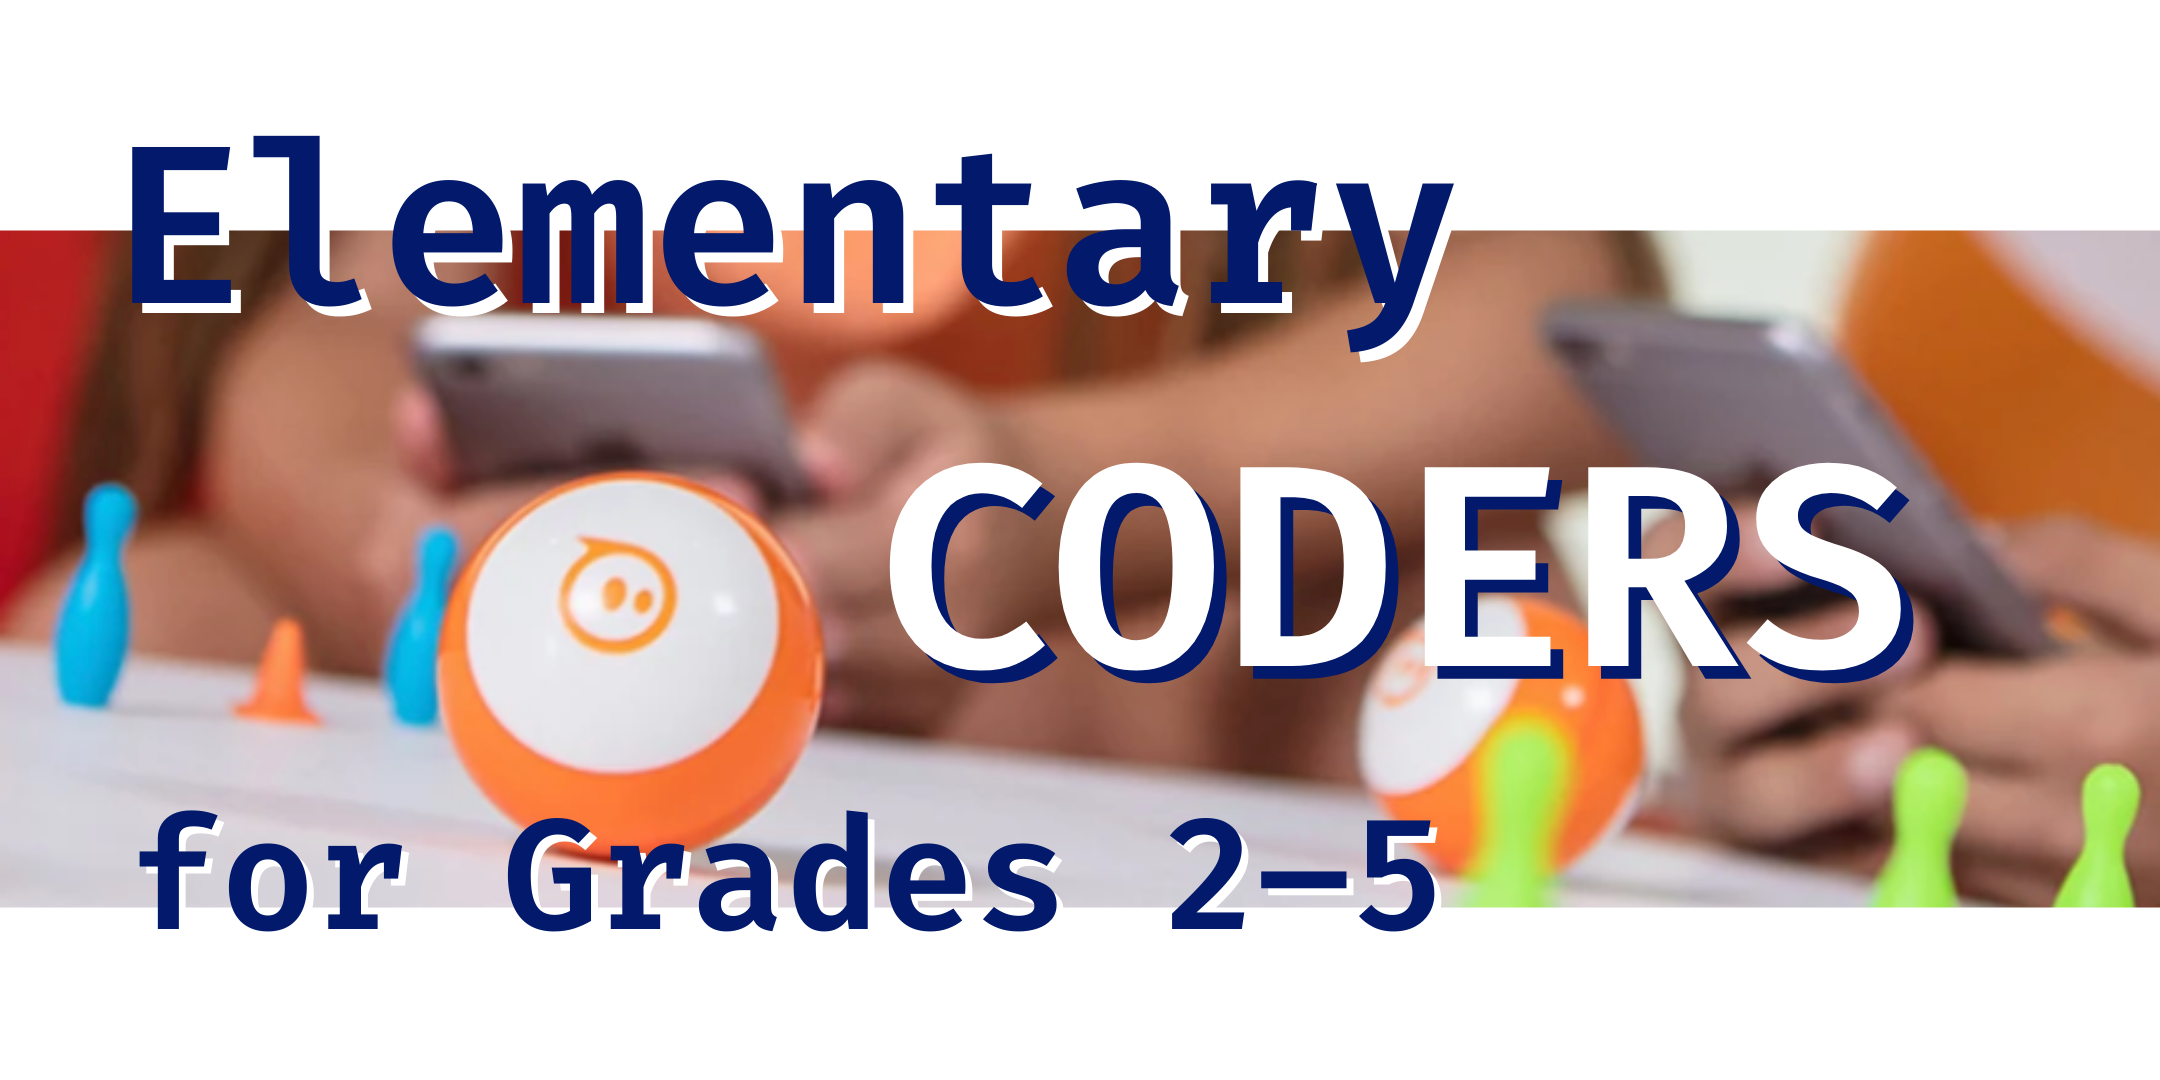 Elementary Coders for Grades 2–5 event image